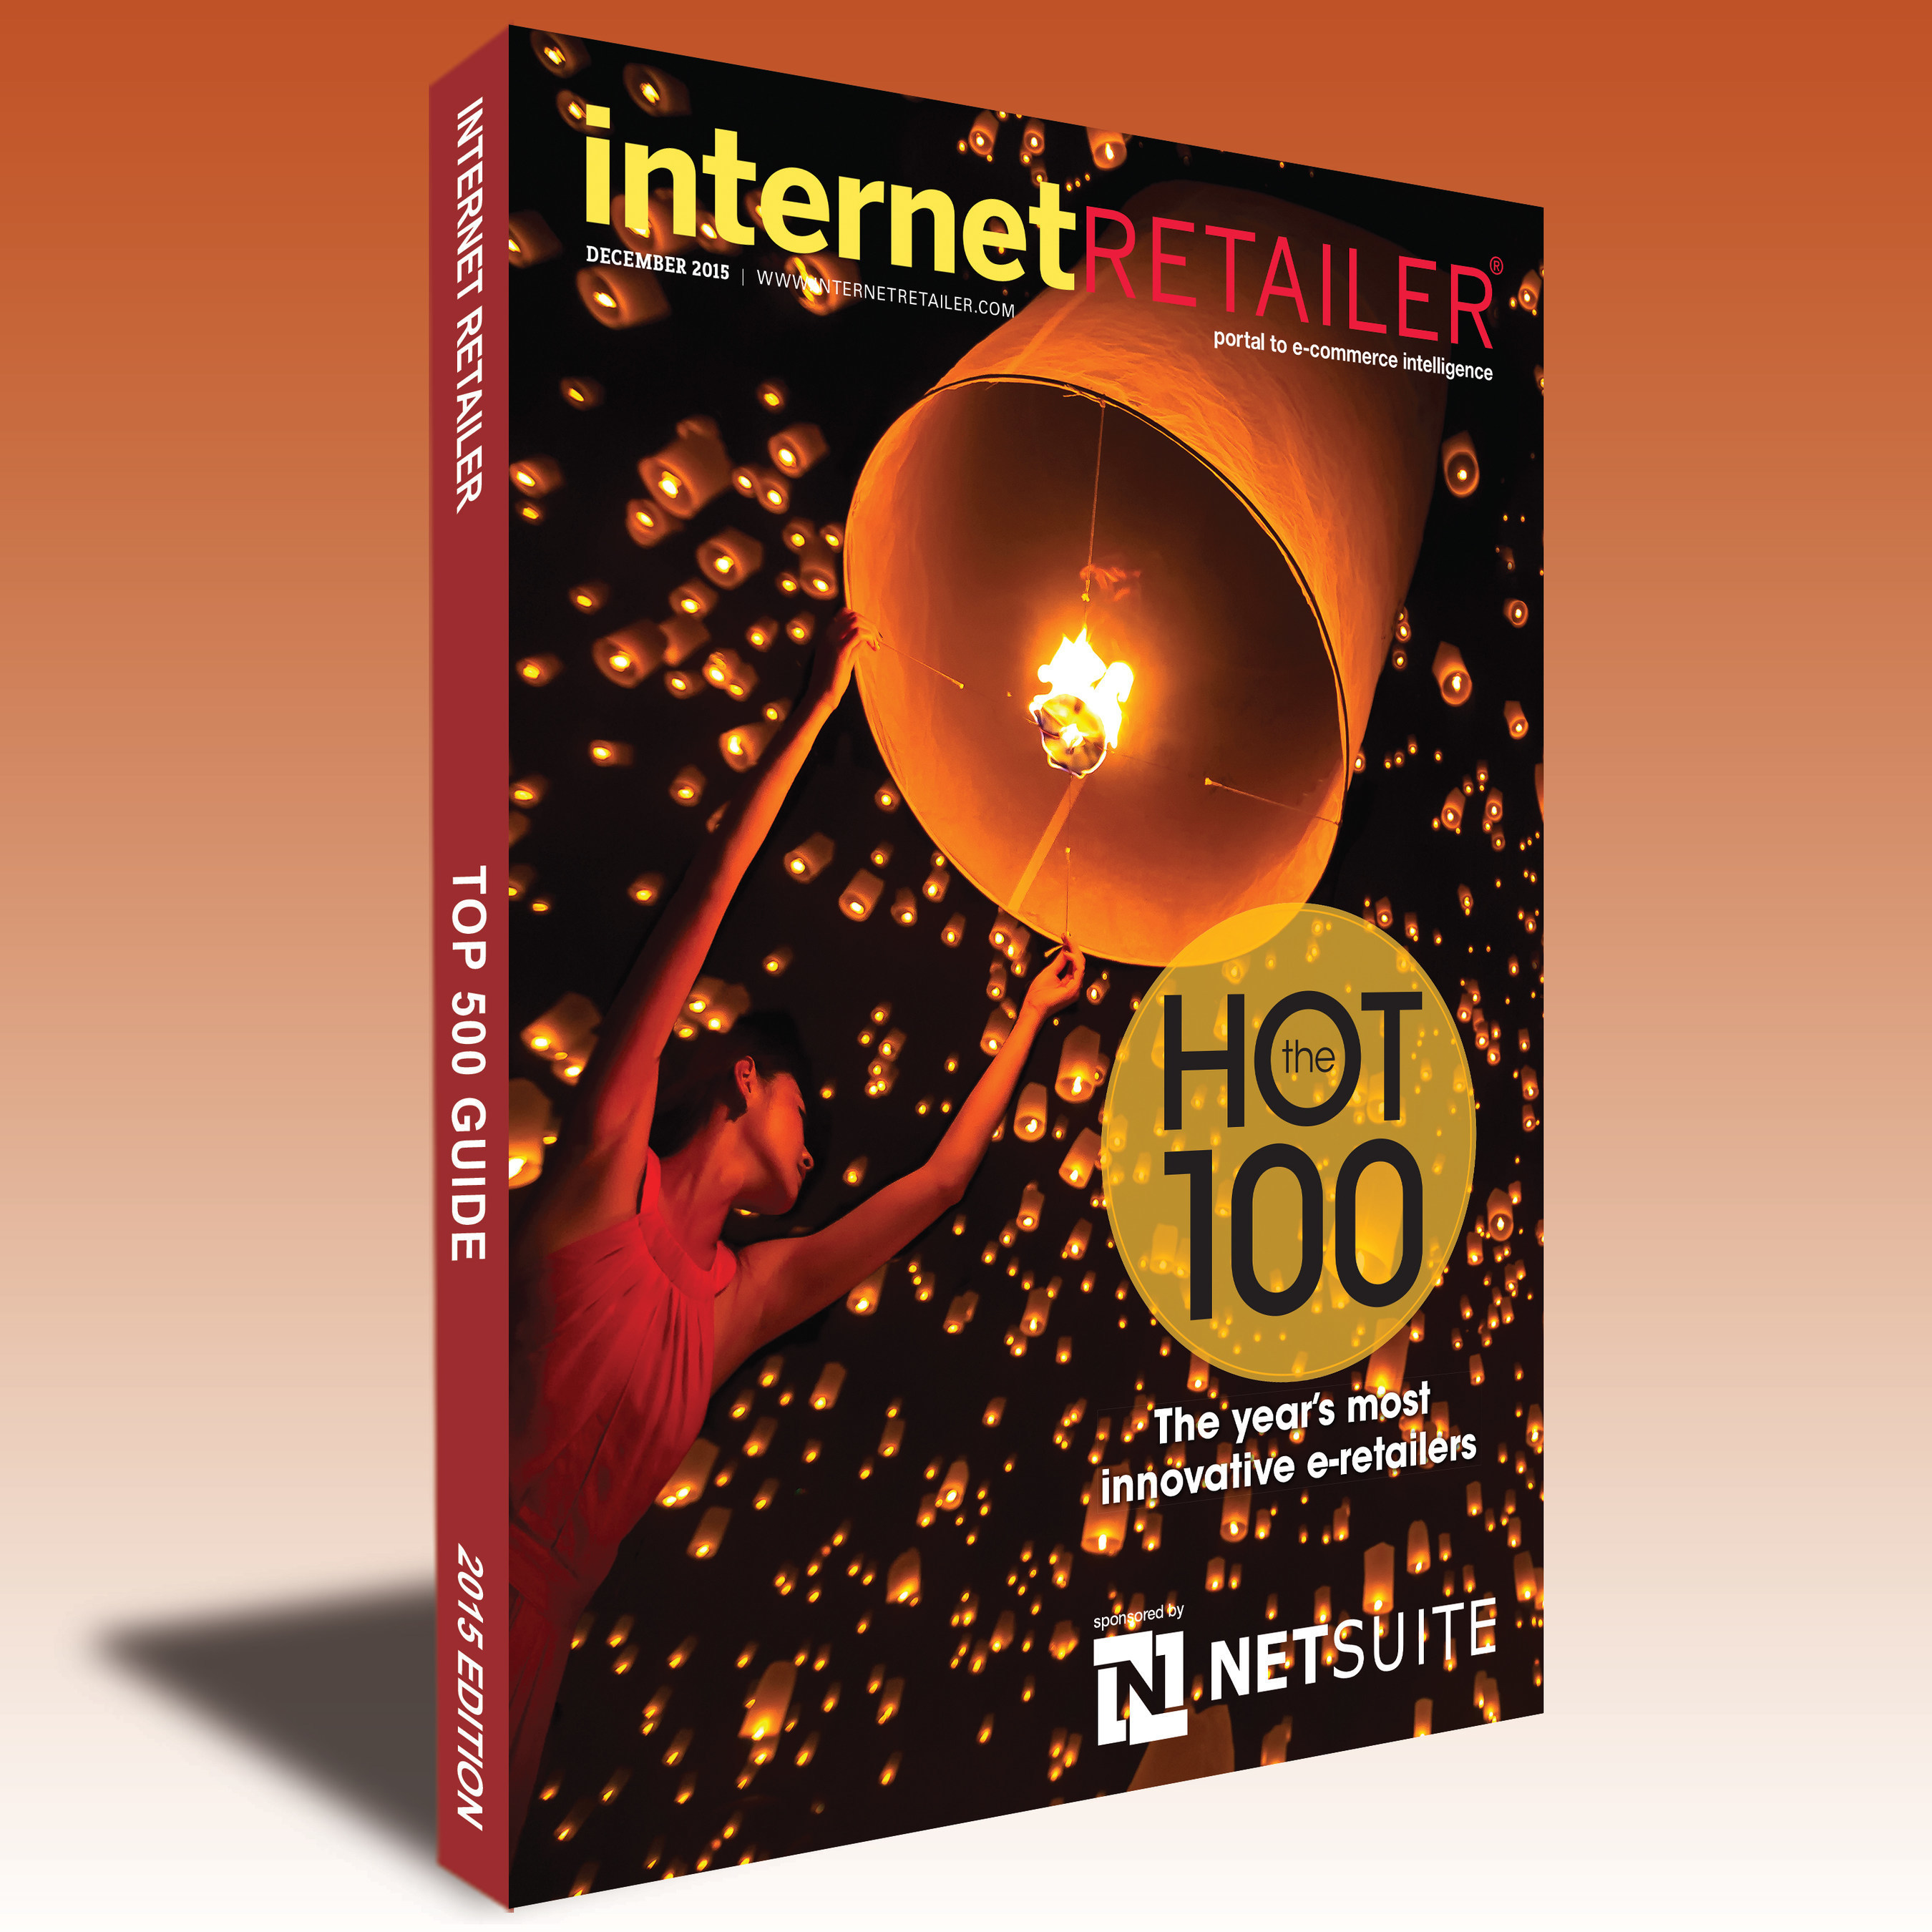 Who are the 100 most innovative global e-retailers of 2016? The editors of Internet Retailer magazine and top industry experts have made their selections!